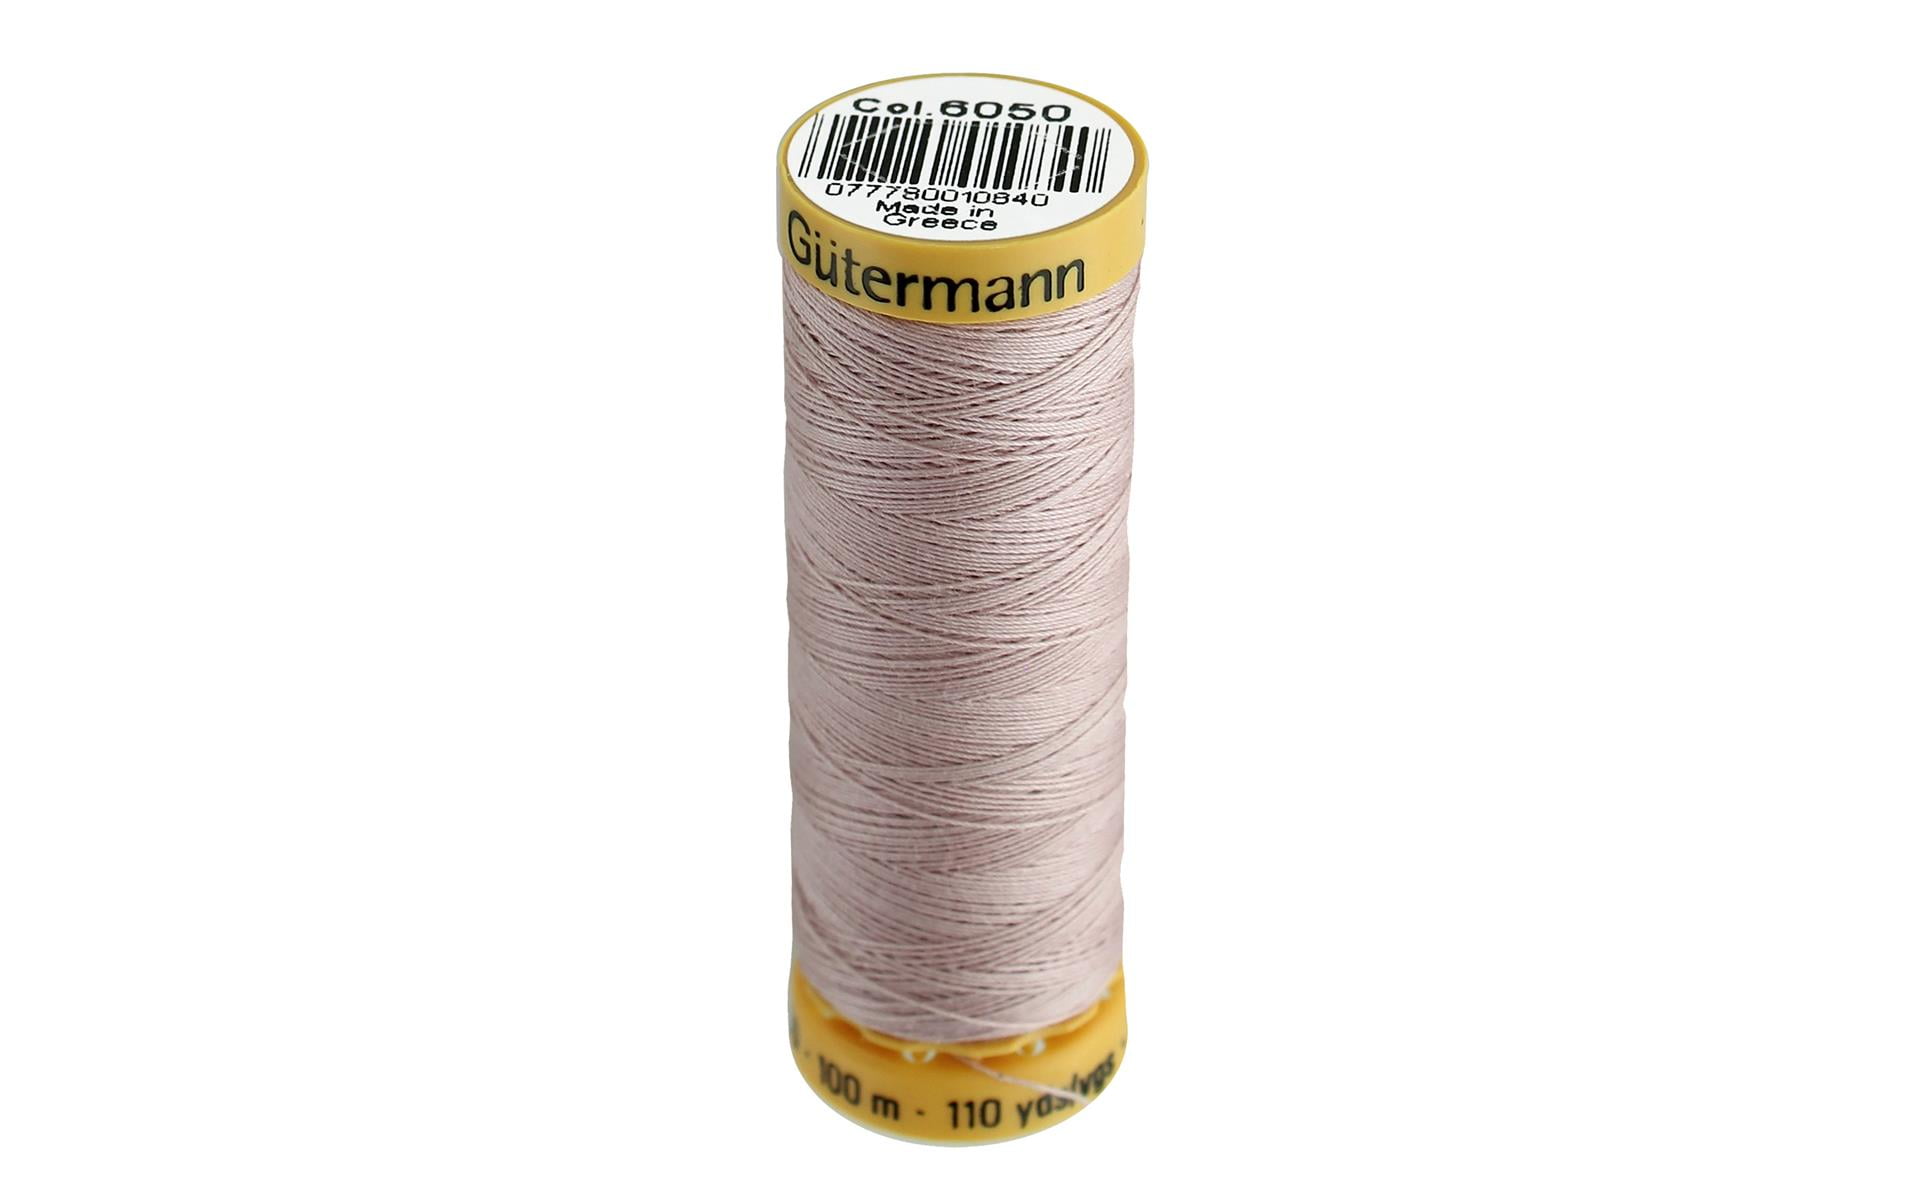 Gutermann Sew-All Thread (110yds) - 98 Colors Available : Sewing